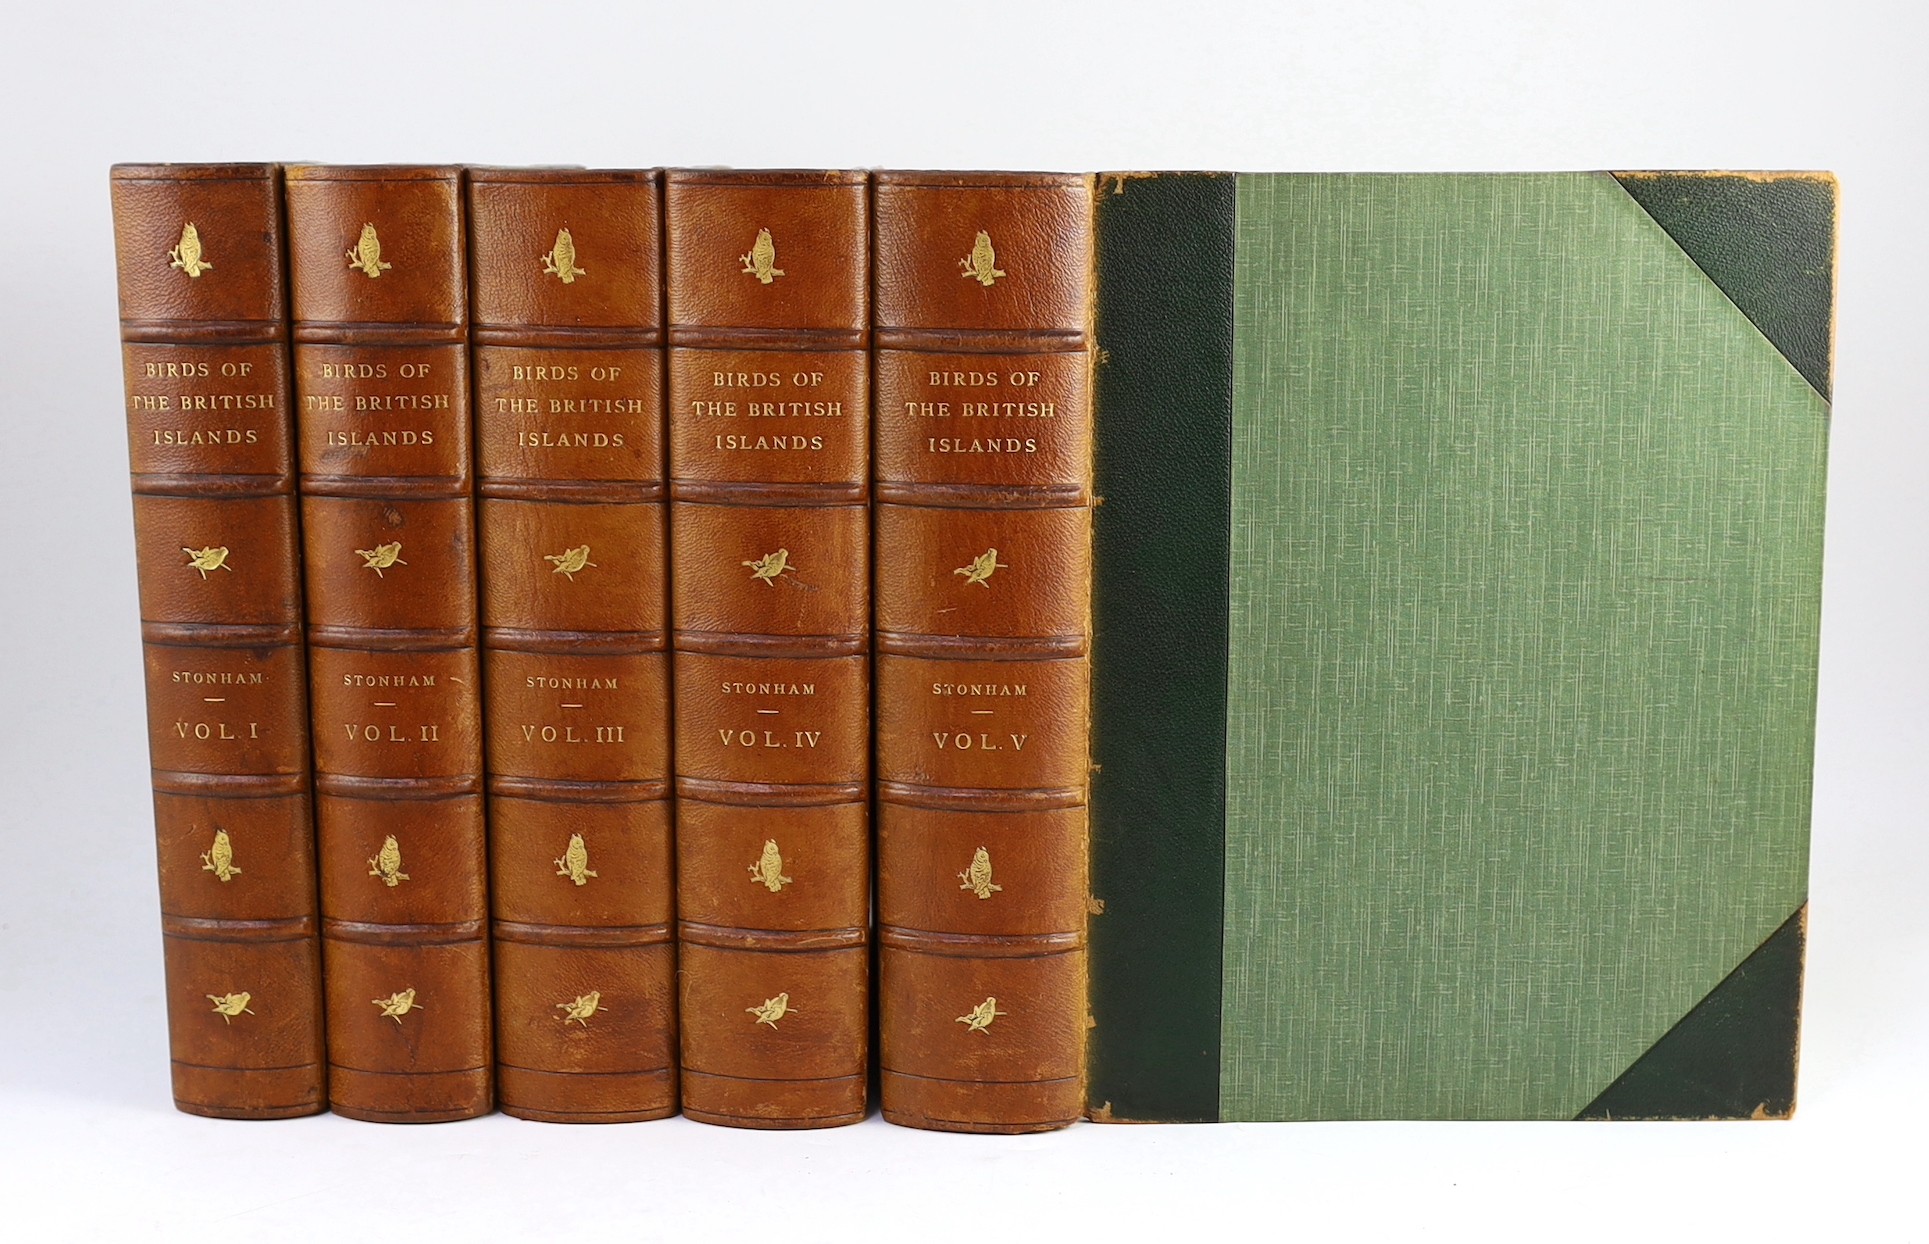 Stonham, Charles - The Birds of the British Islands, illustrated by Lilian M. Medland, 5 vols, folio, half calf with green cloth boards, with 2 folding maps, a double-page diagram and 318 full page tissue-guarded engrave